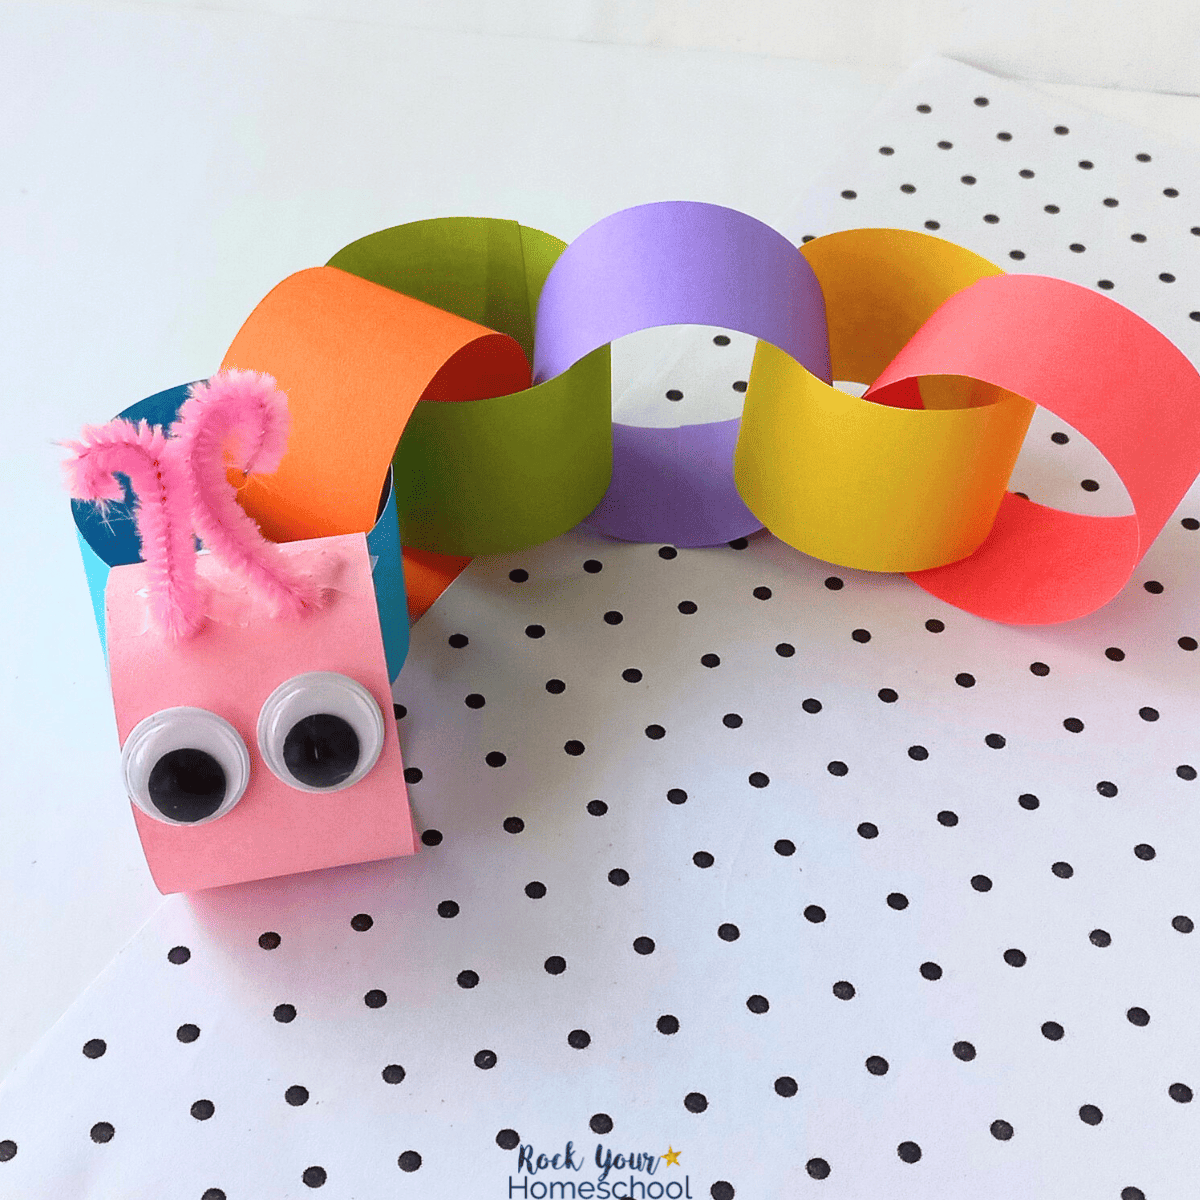 Example of simple paper chain caterpillar craft in rainbow of colors.